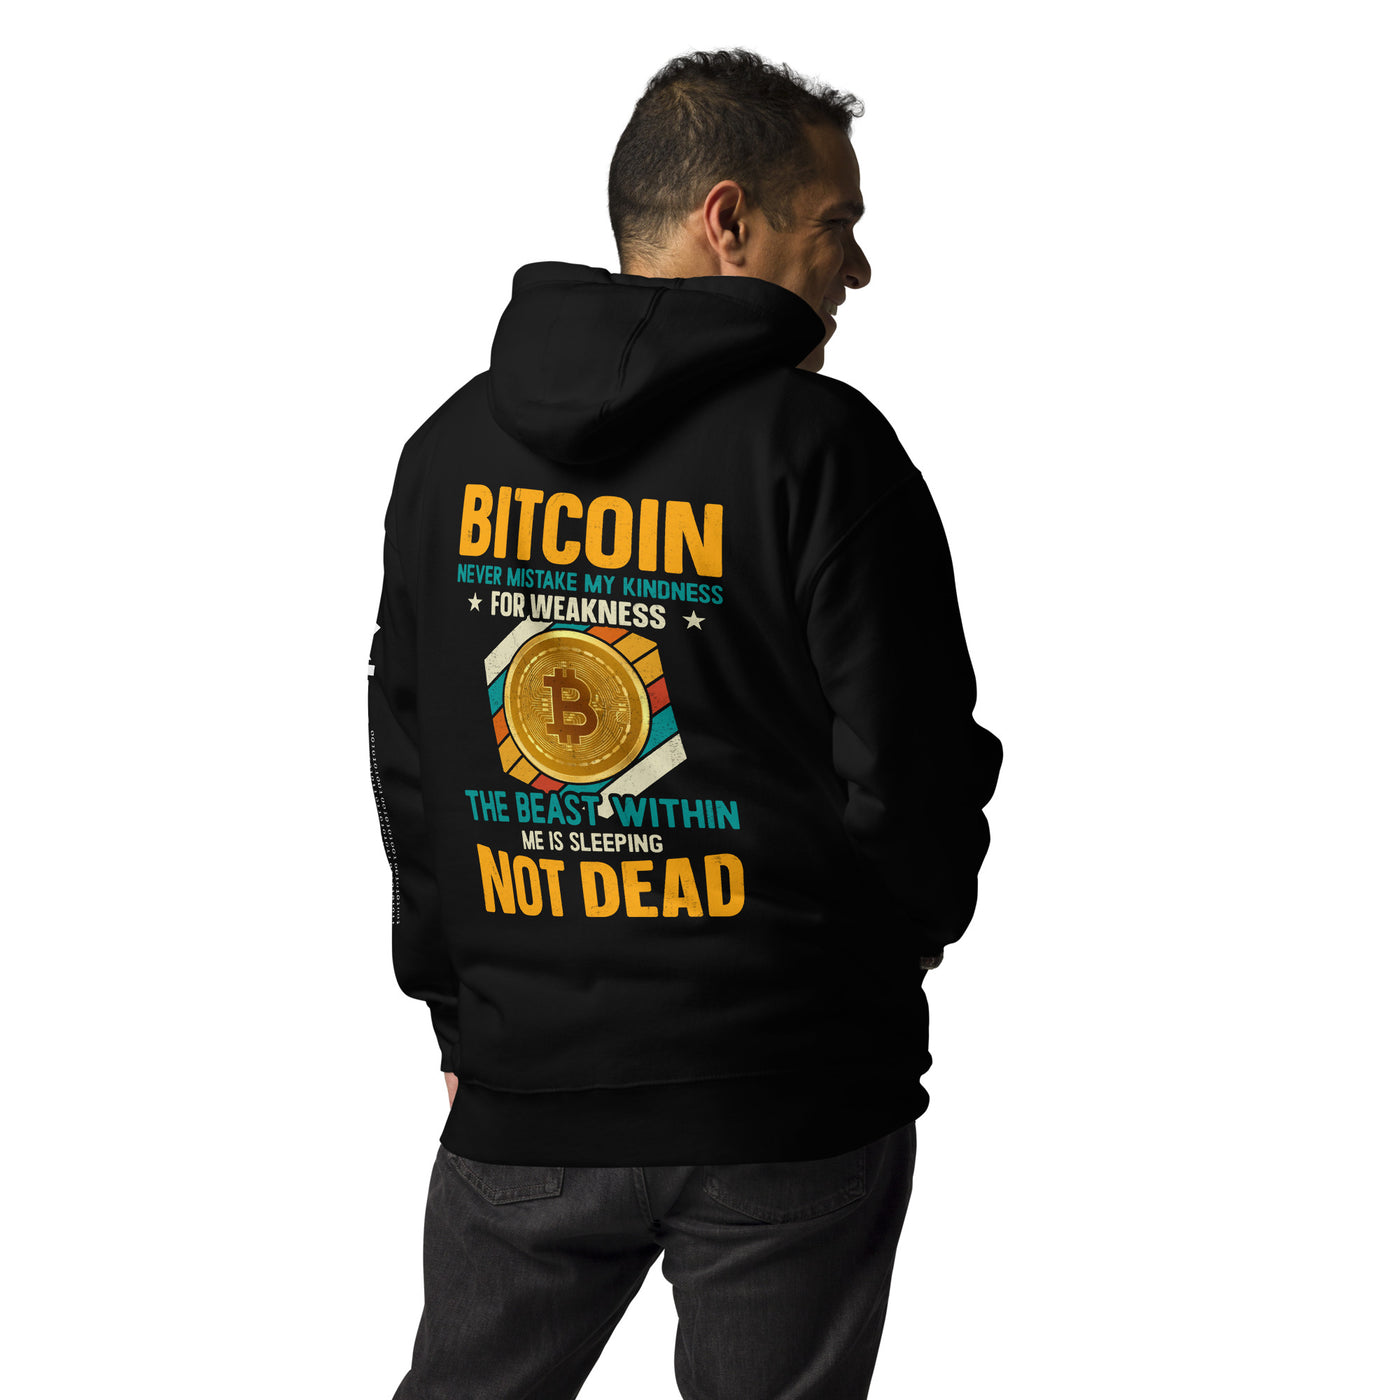 Bitcoin : Never Mistake my Kindness for Weakness - Unisex Hoodie ( Back Print )